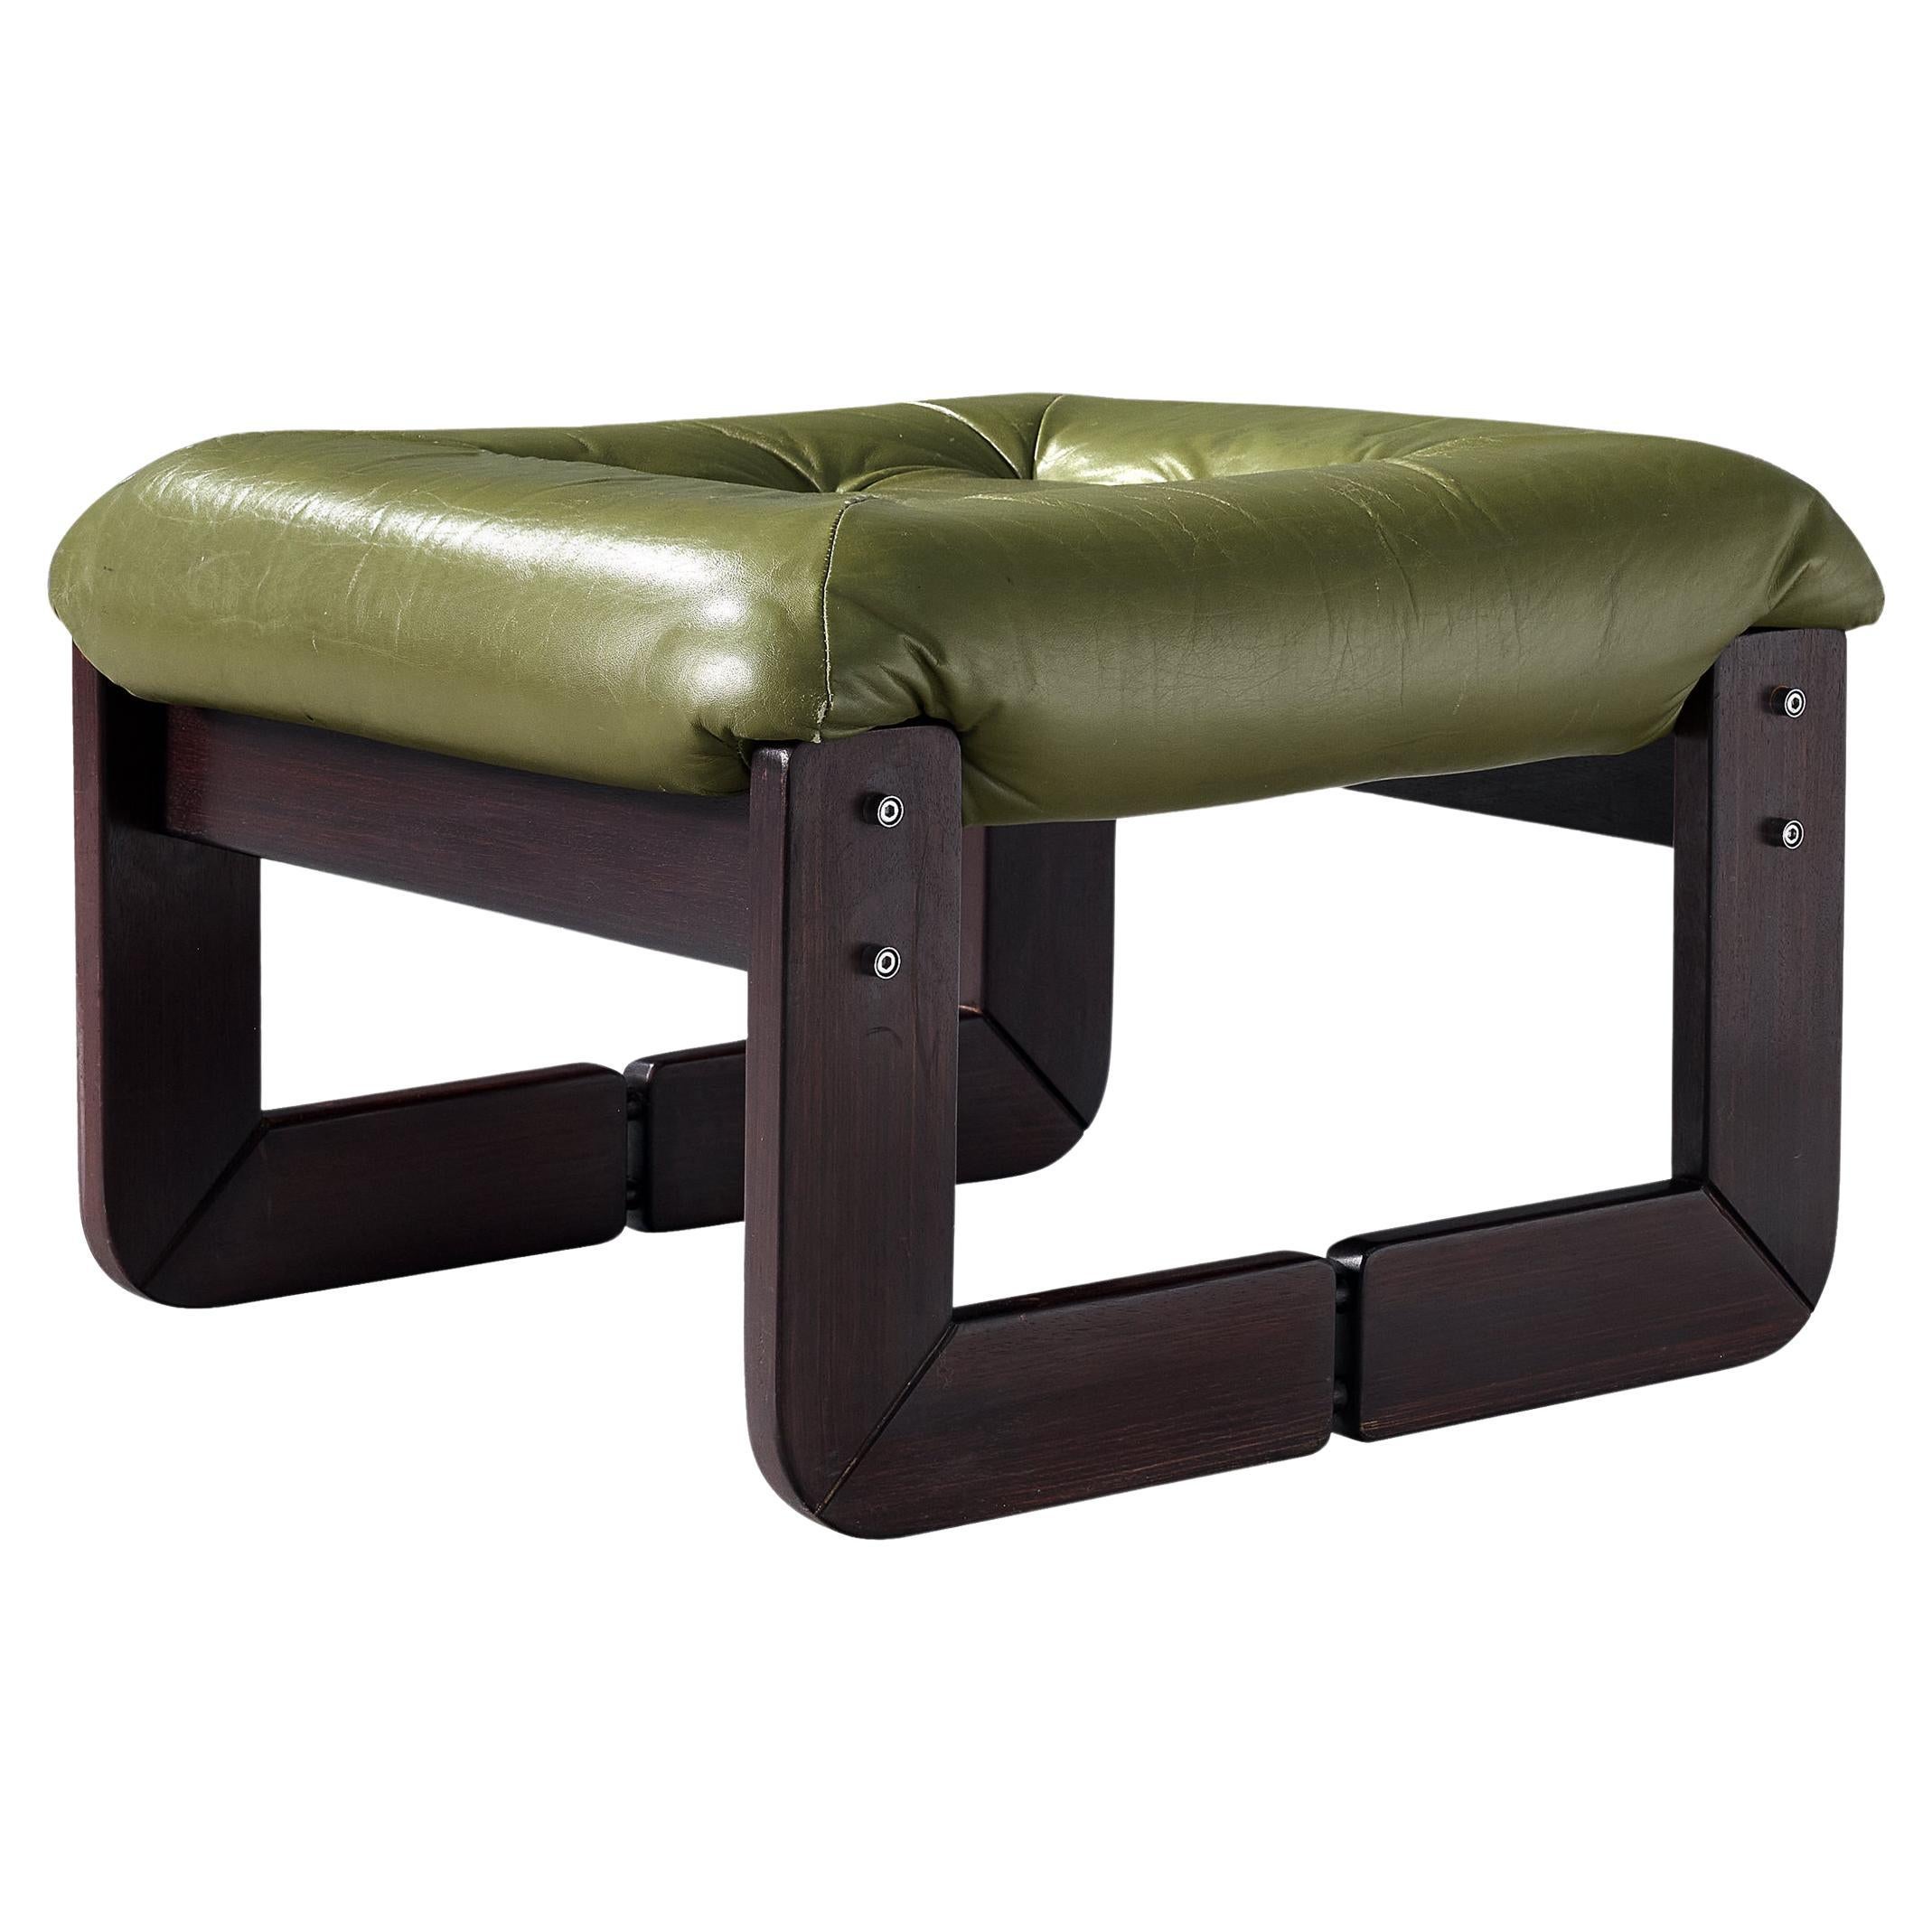 Percival Lafer Ottoman in Olive Green Leather and Mahogany 